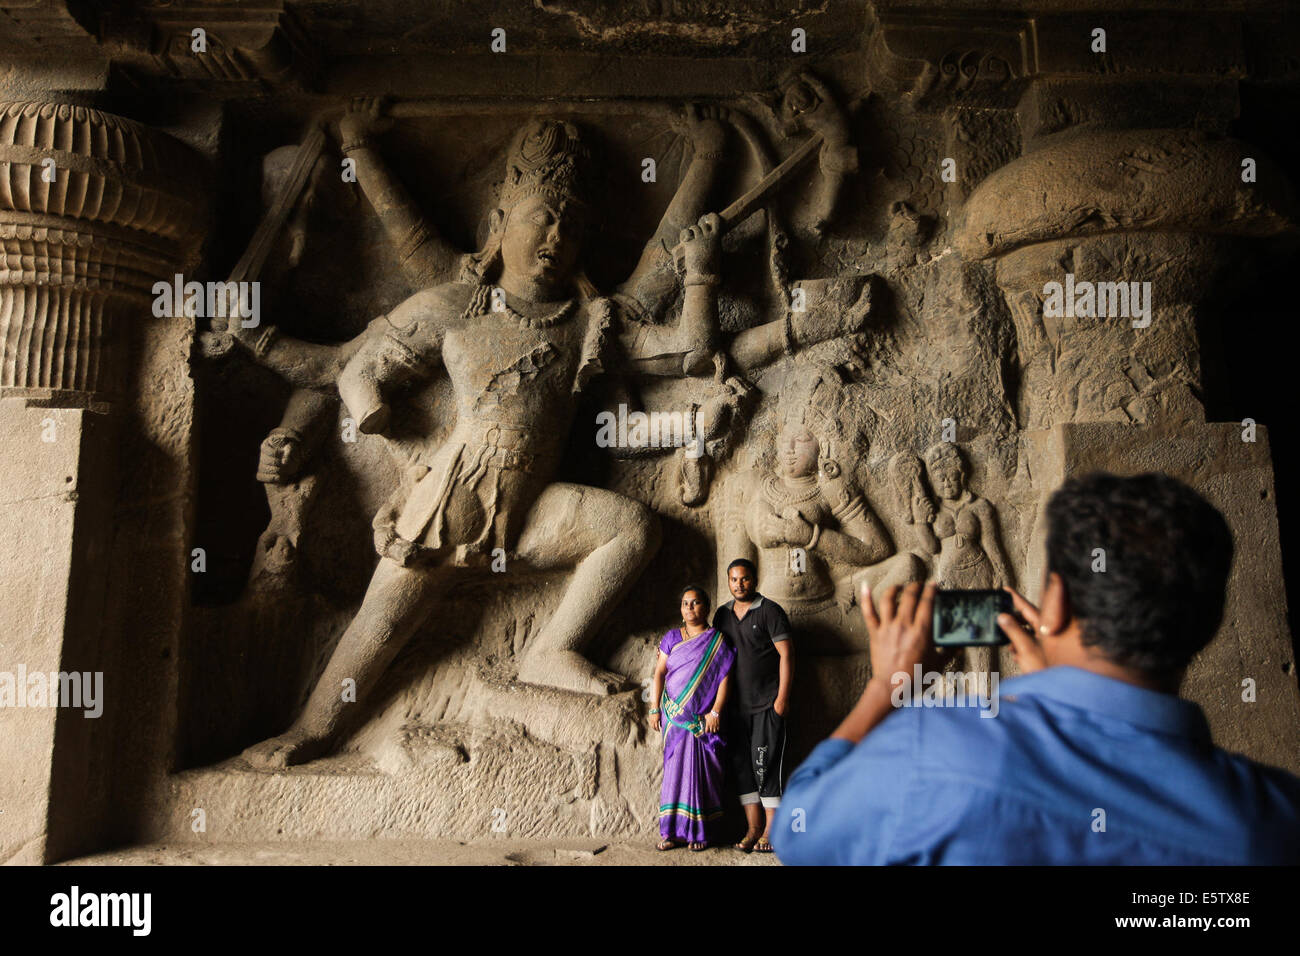 Maharashtra, India. 6th Aug, 2014. Tourists visit the Hindu stone carvings at the ellora caves near Aurangabad in Maharashtra, India, Aug. 6, 2014. The 34 monasteries and temples, extending over more than 2 km, were dug side by side in the wall of a high basalt cliff, not far from Aurangabad, in Maharashtra. Ellora, with its uninterrupted sequence of monuments dating from A.D. 600 to 1000, brings the civilization of ancient India to life. Not only is the Ellora complex a unique artistic creation and a technological exploitation but, with its sanctuaries devoted to Buddhism, Hind Stock Photo